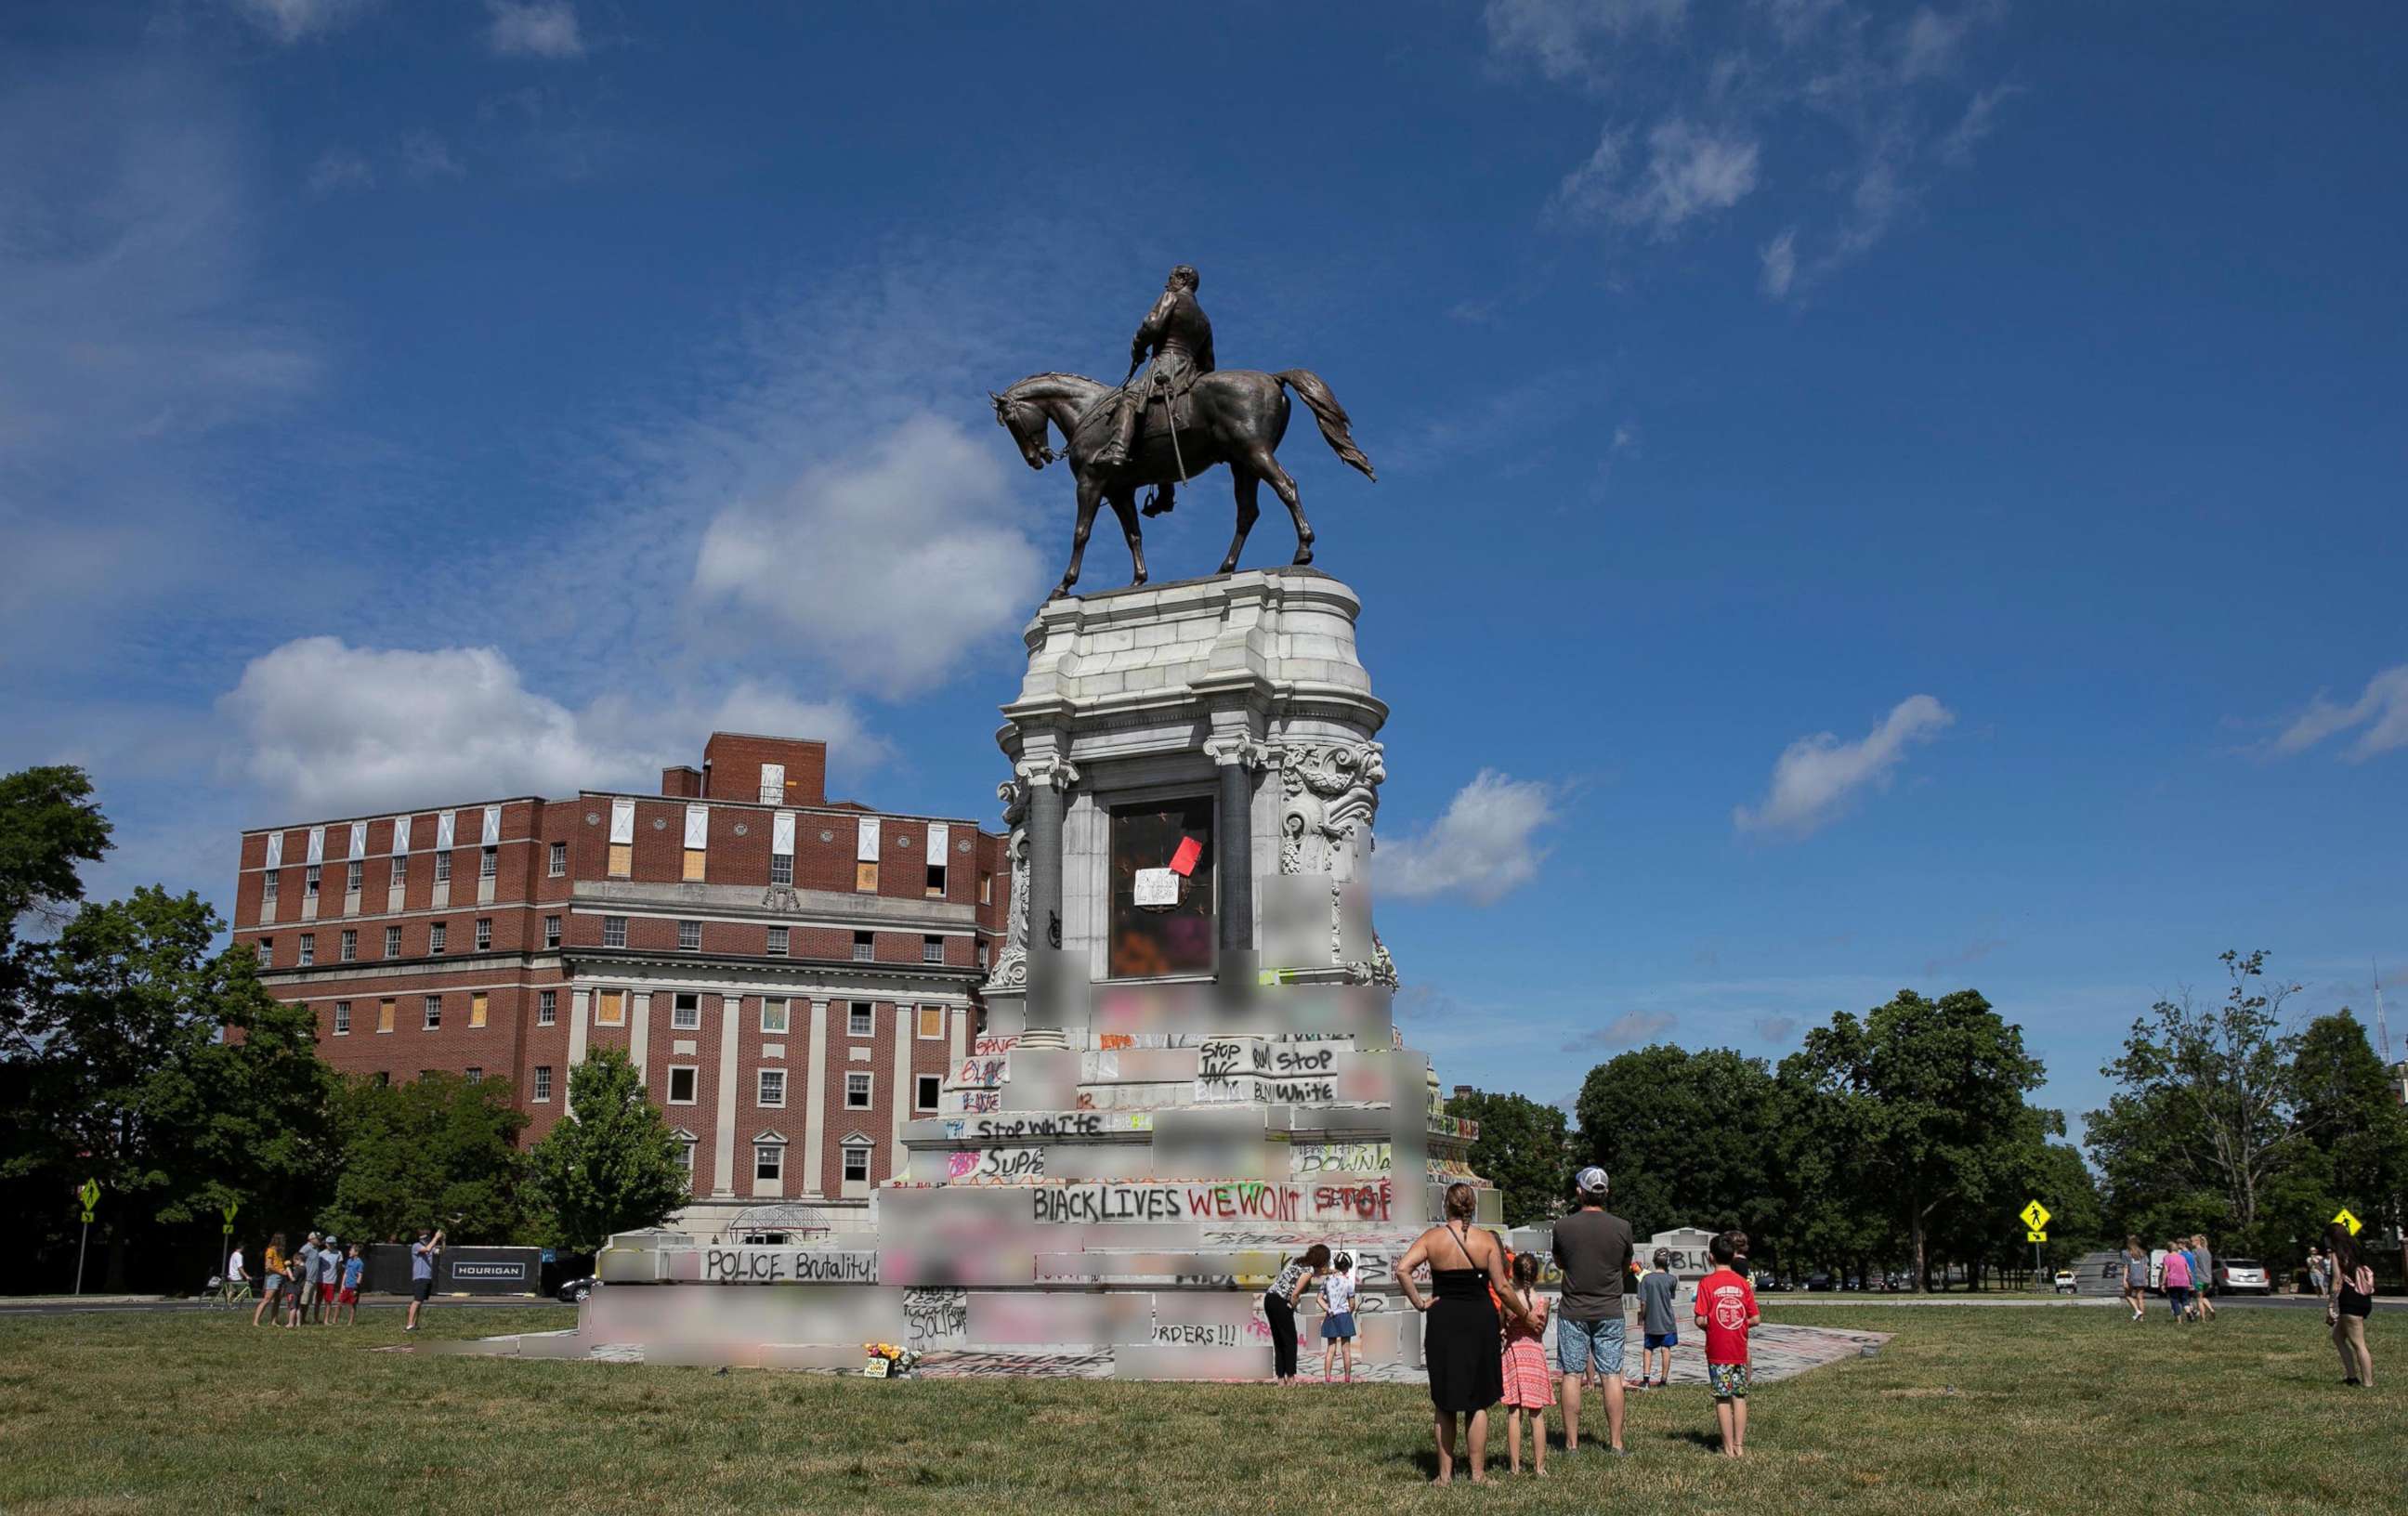 PHOTO: People visit a monument of Confederate general Robert E. Lee after Virginia Governor Ralph Northam ordered its removal after widespread civil unrest following the death in Minneapolis police custody of George Floyd, in Richmond, Va. June 5, 2020. 